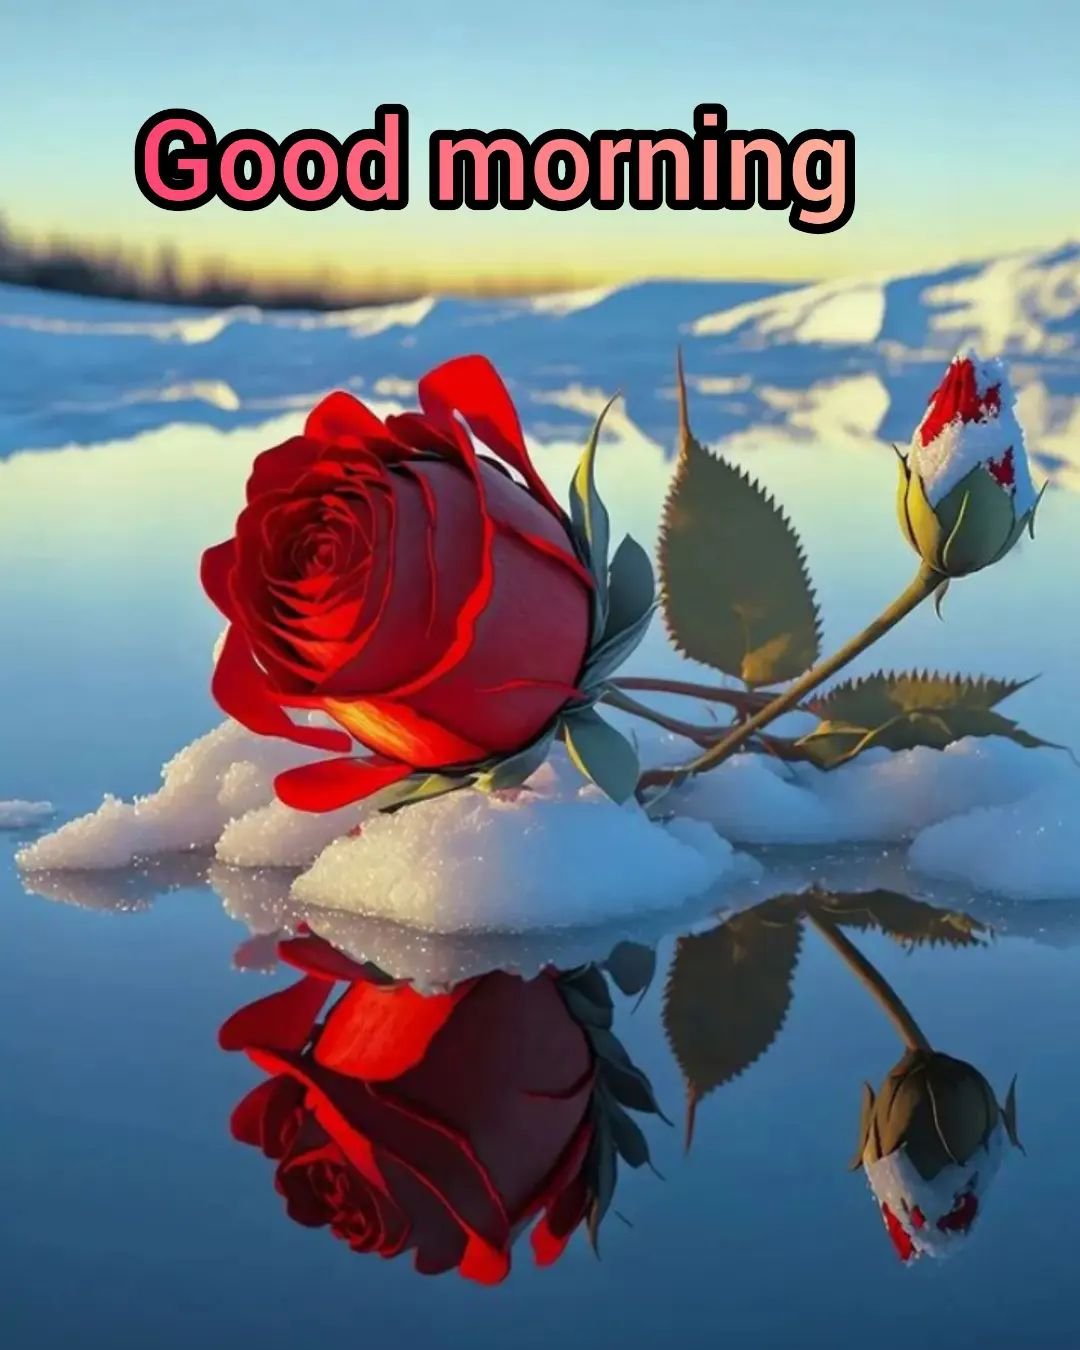 New Beautiful Good Morning Images